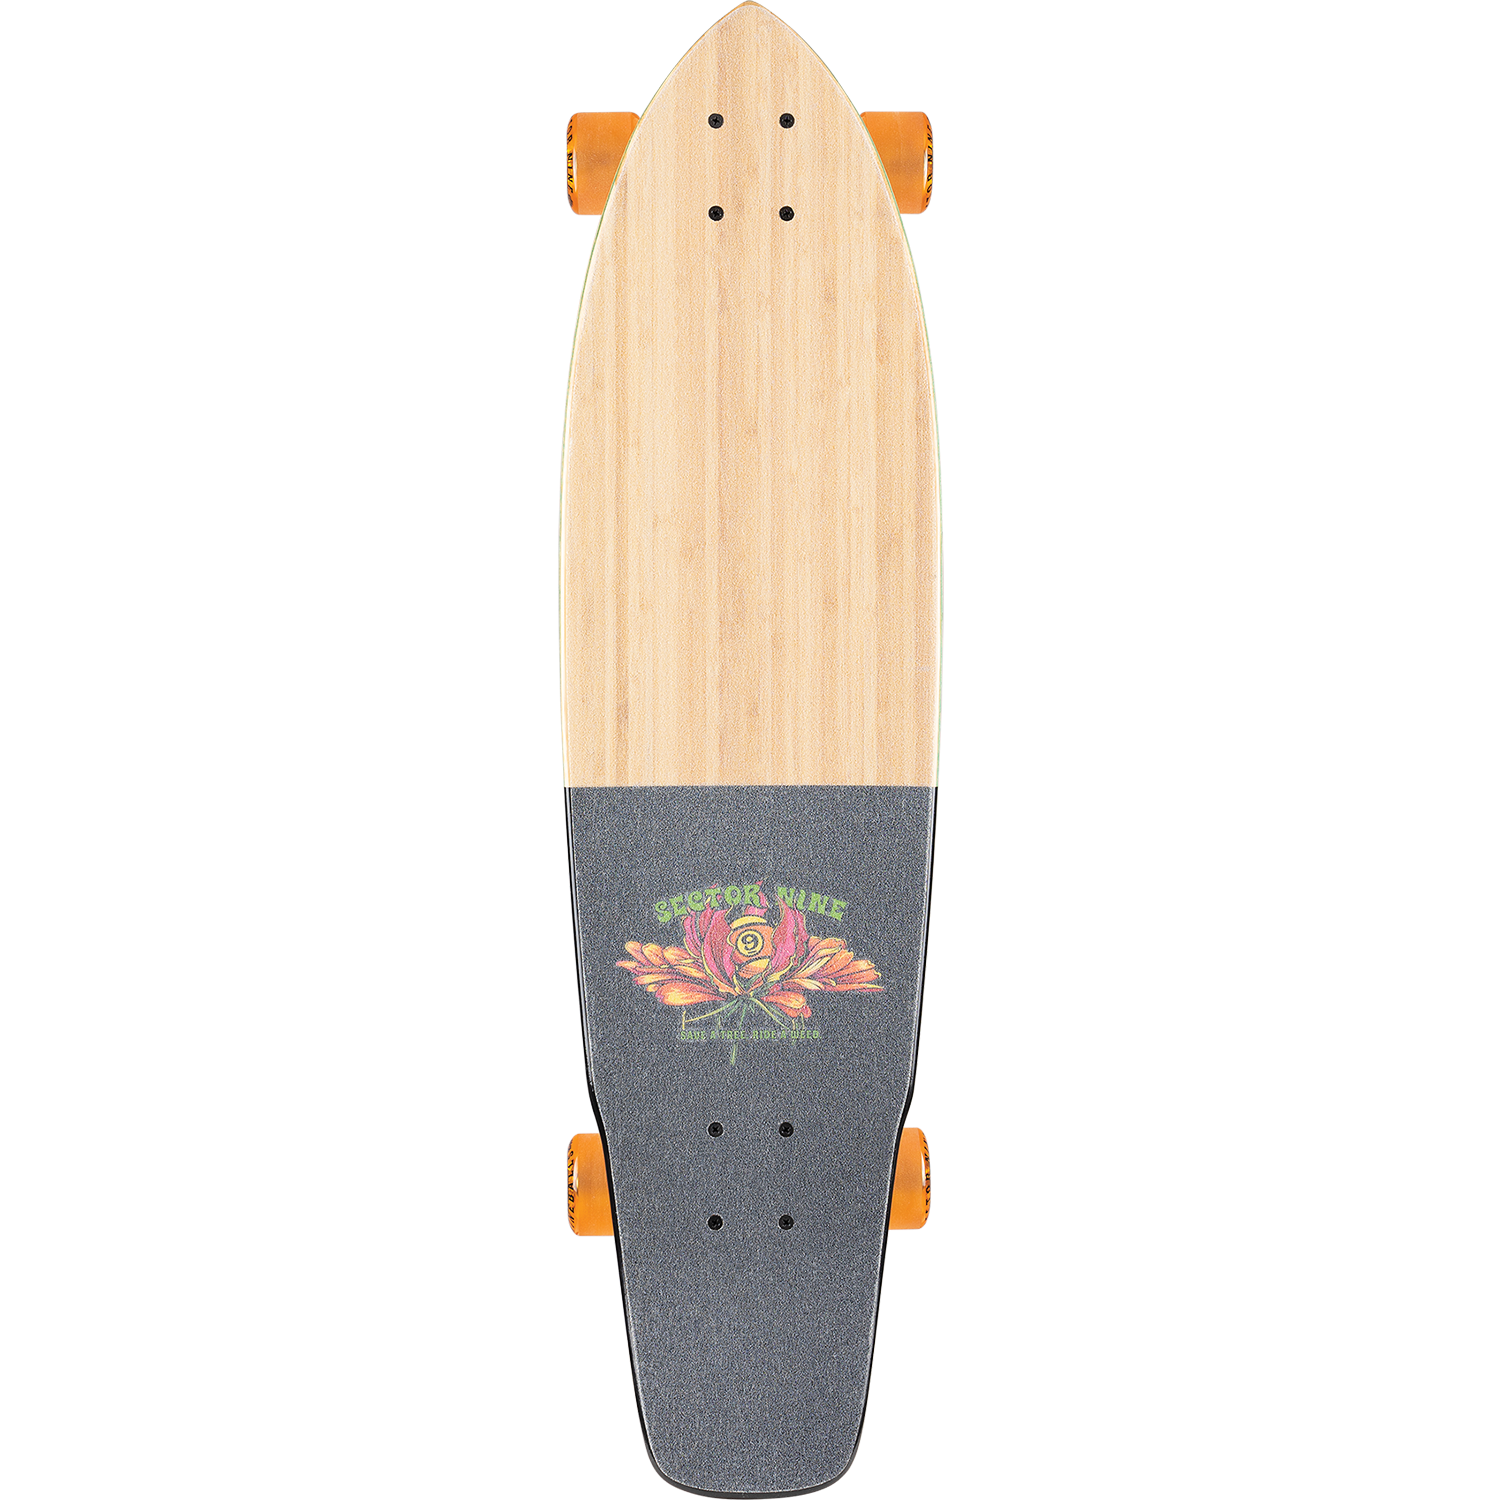 SECTOR 9 // EDEN FT. POINT COMPLETE-8.7x34